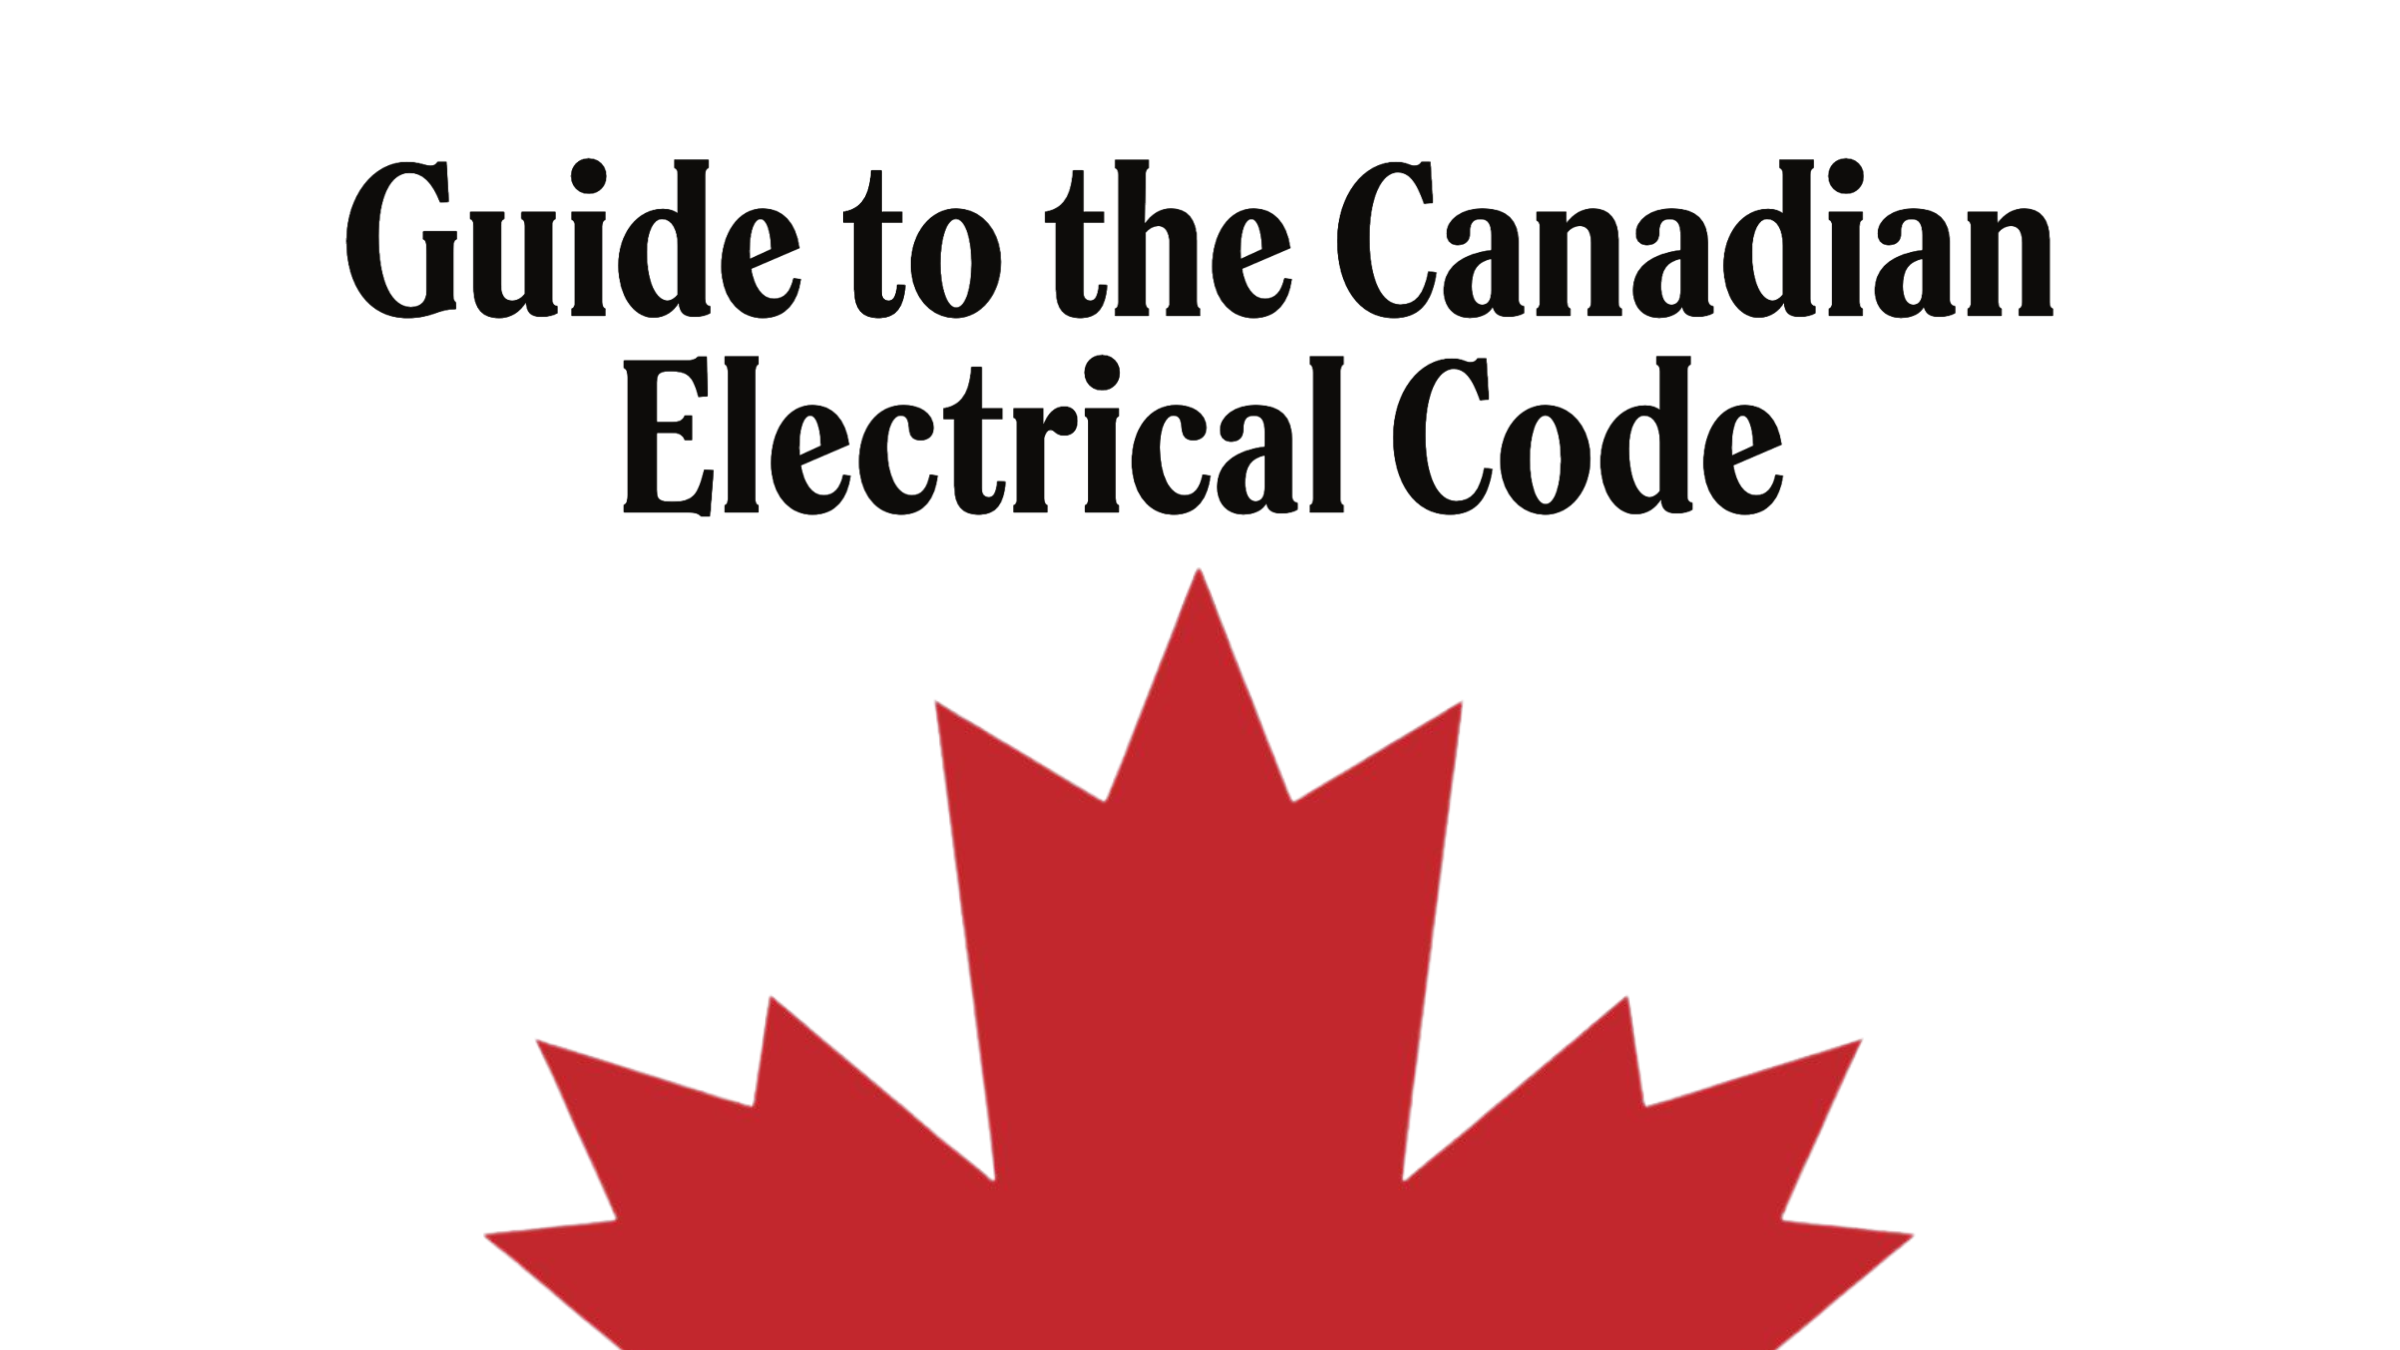 Guide to the Canadian Electrical Code, Part 1 , 25th Edition – A Road Map: Section 80